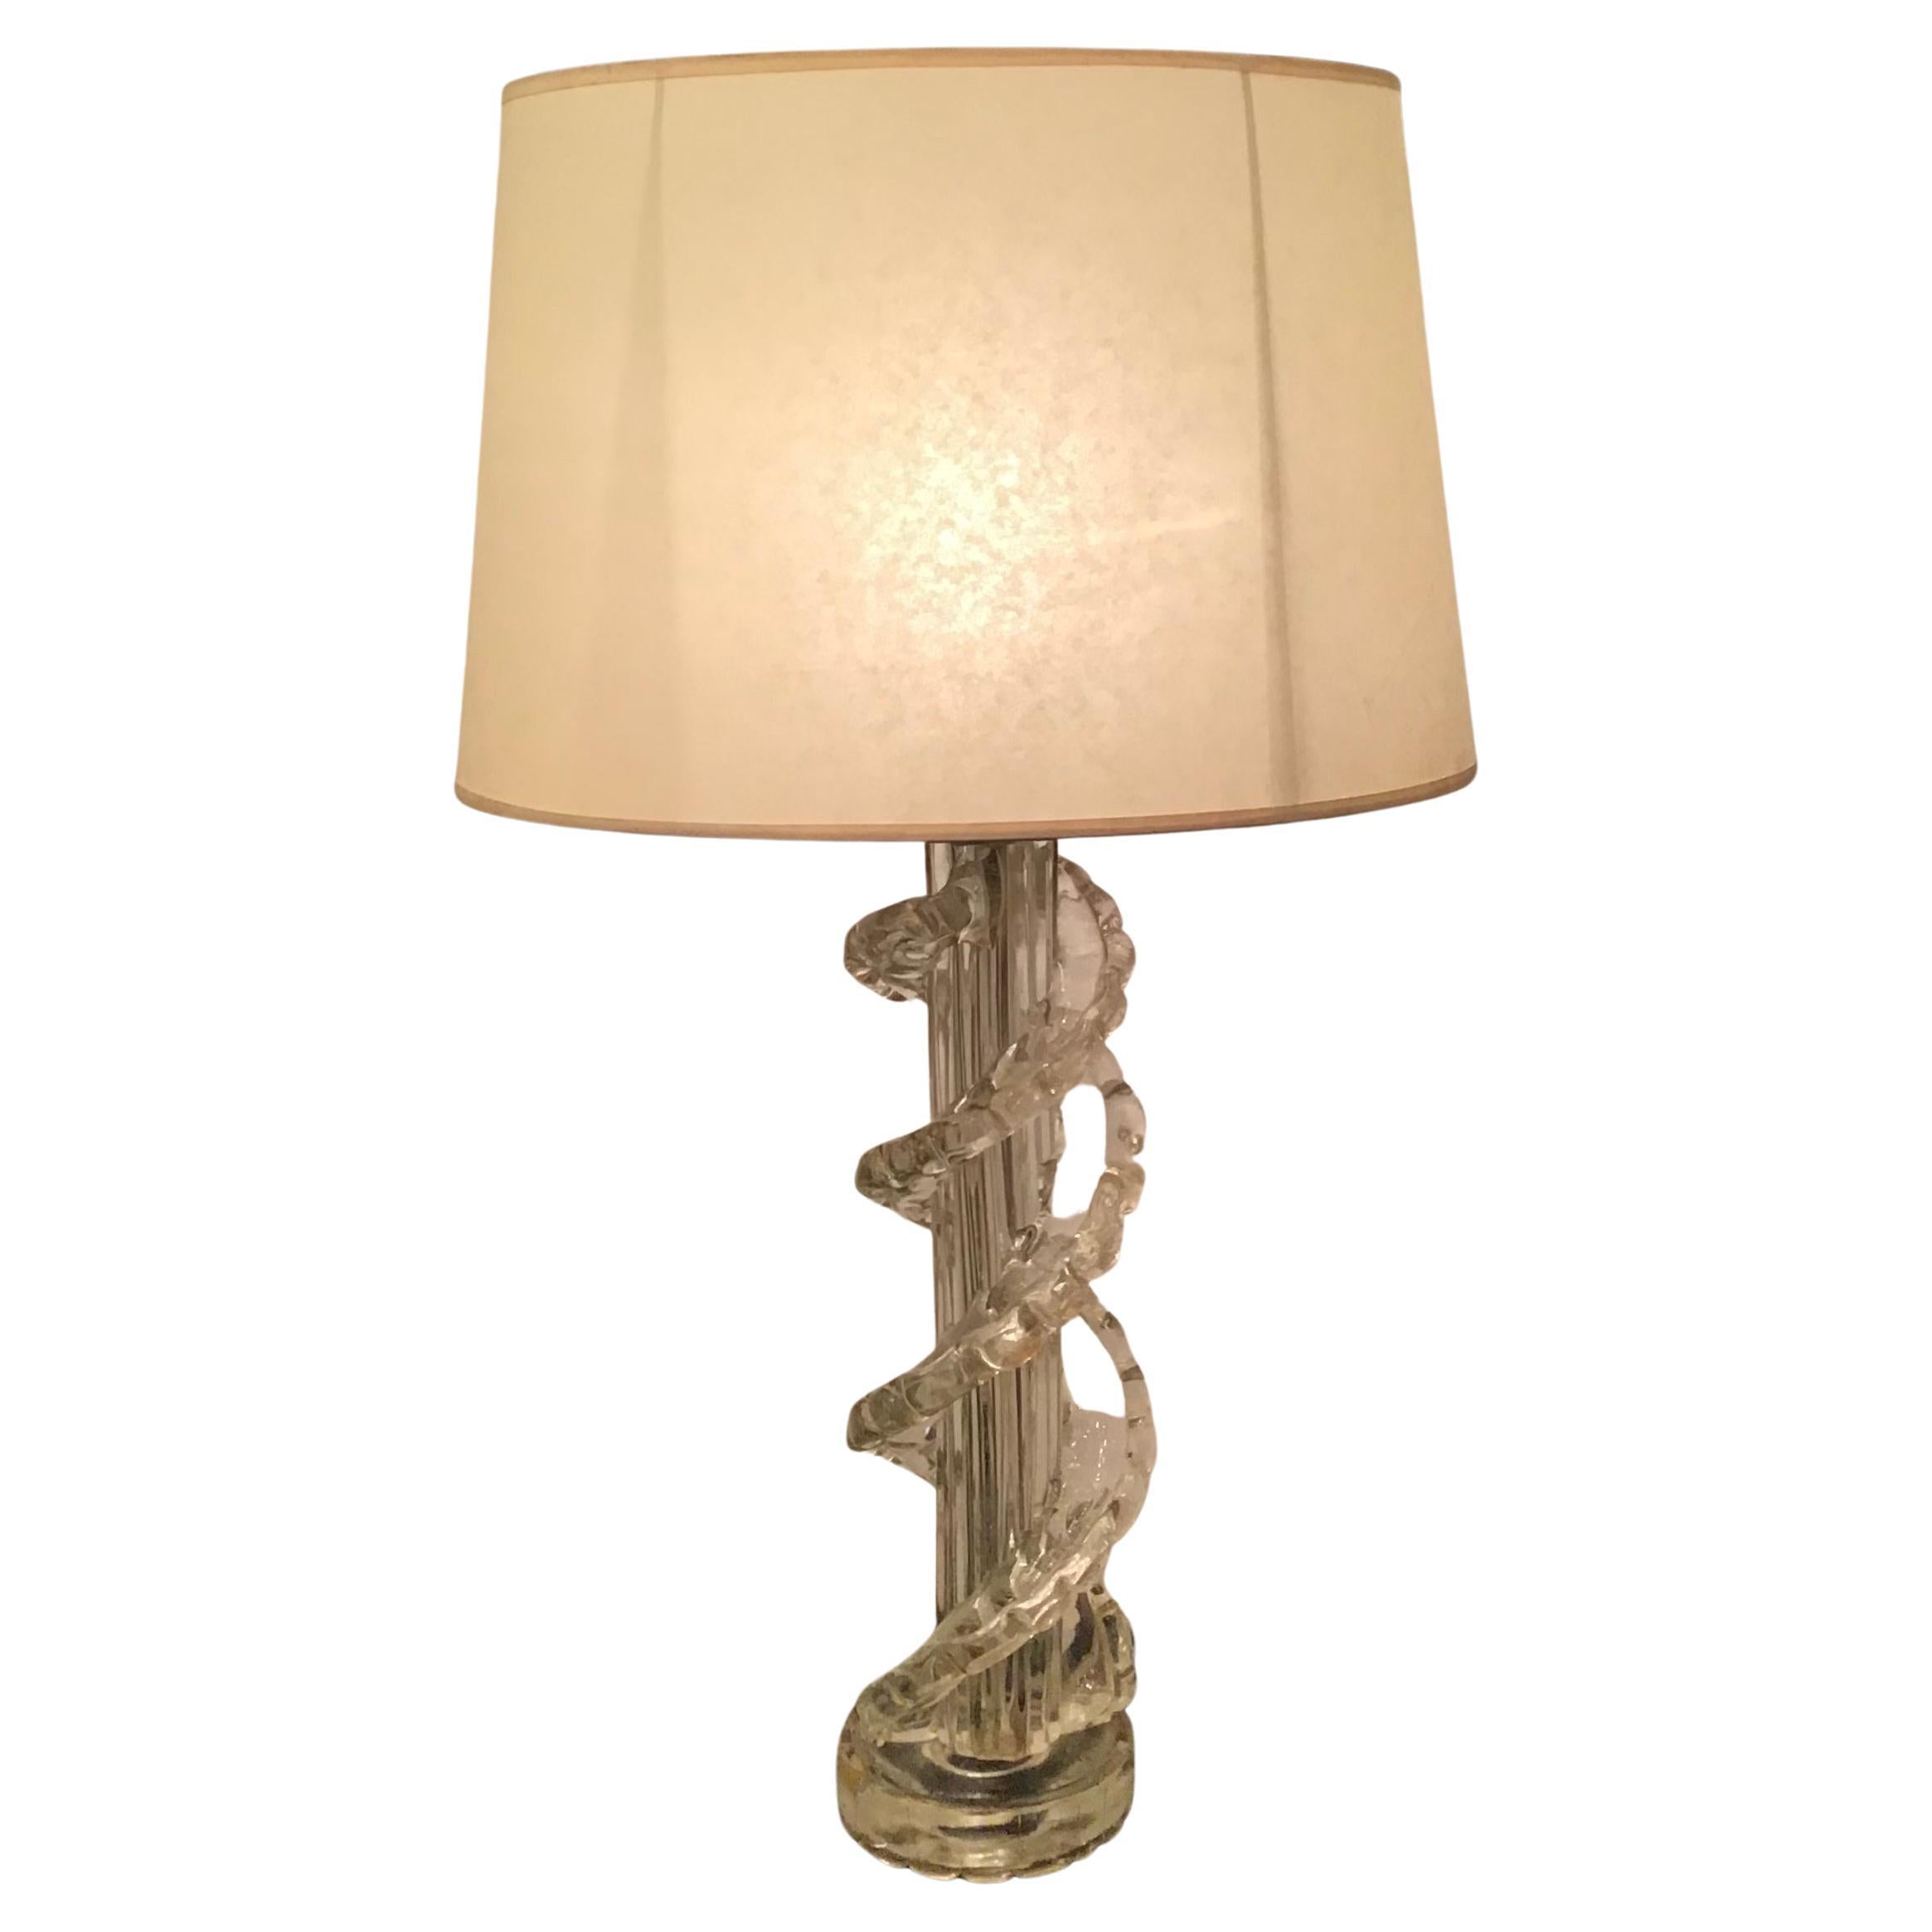 Ercole Barovier Table Lamp Murano Glass Brass Parchment Lampshade 1940 Italy For Sale